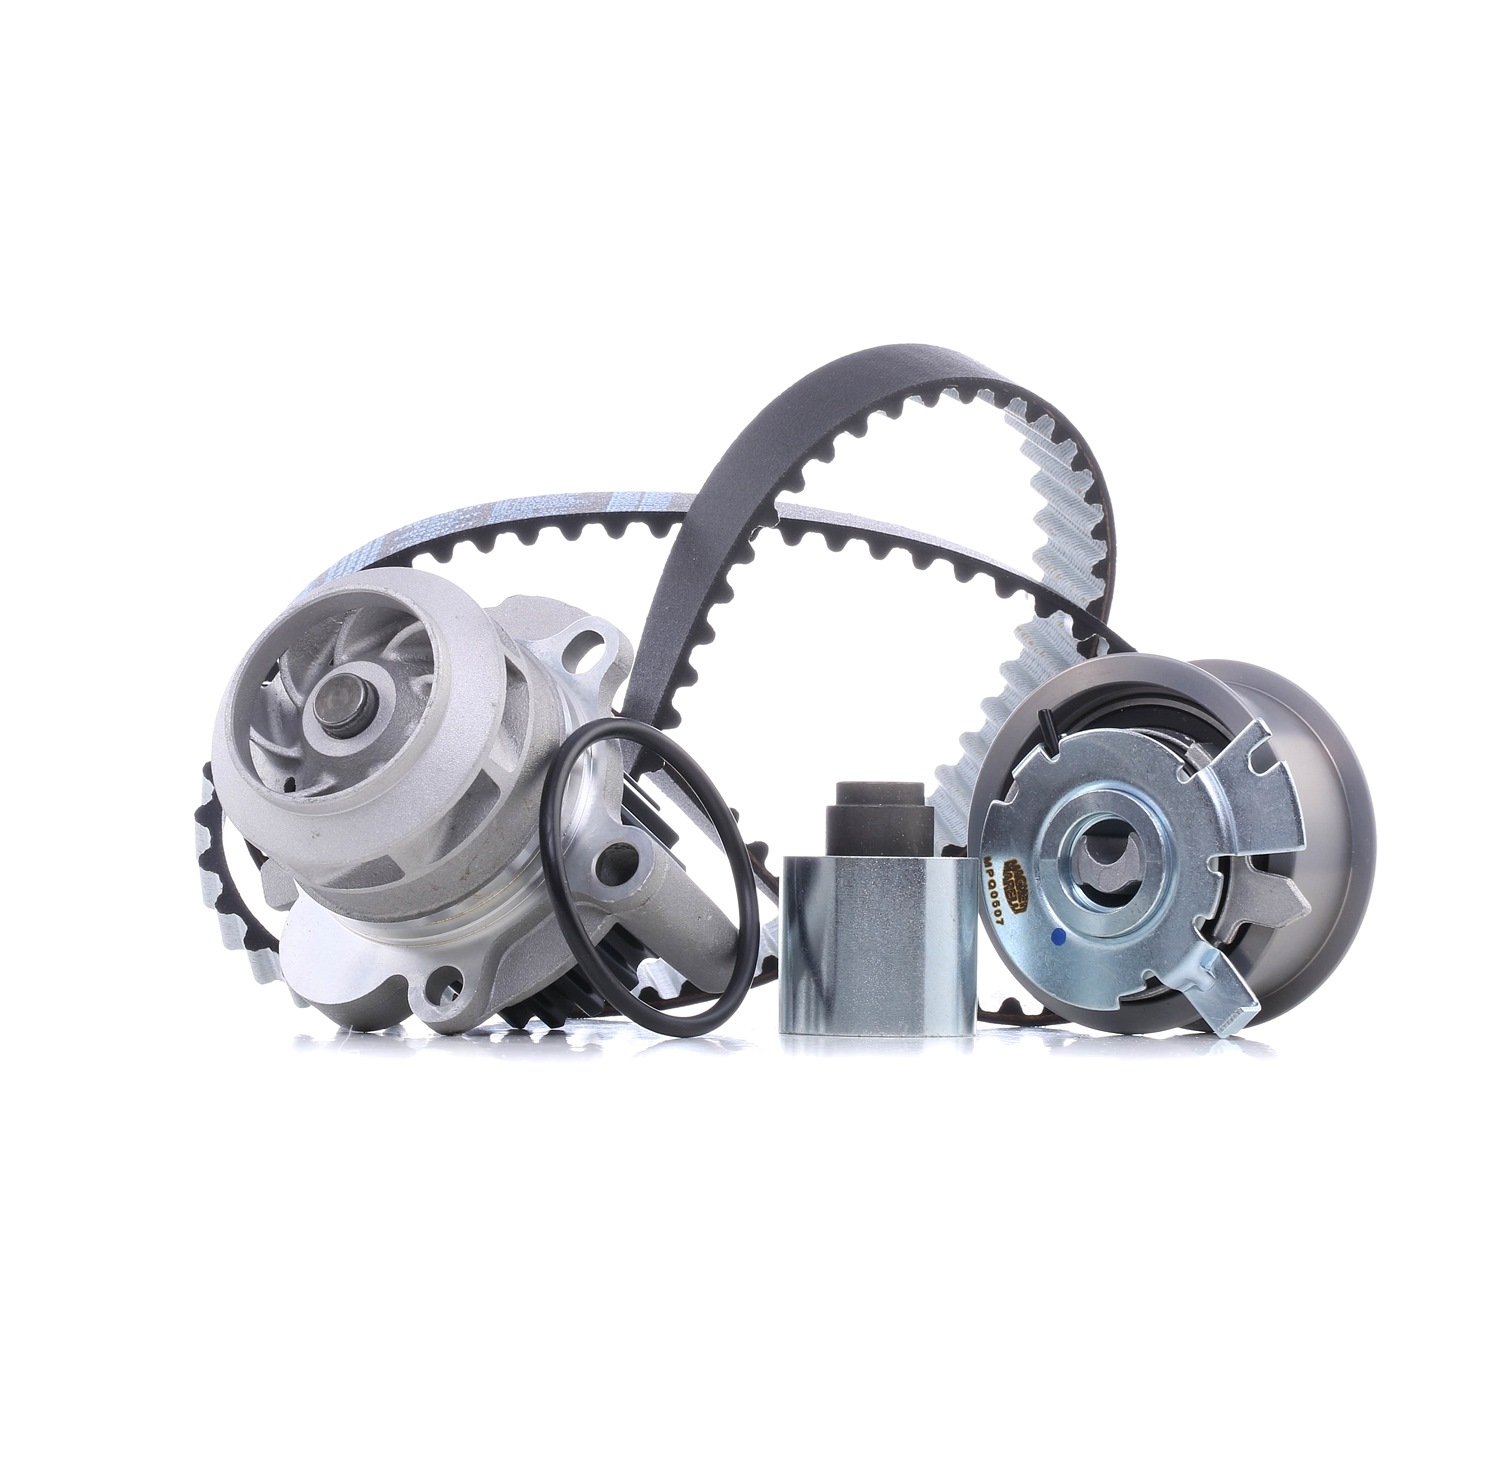 MAGNETI MARELLI 132011160048 Water pump and timing belt kit Number of Teeth: 120 L: 1143 mm, Width: 30 mm